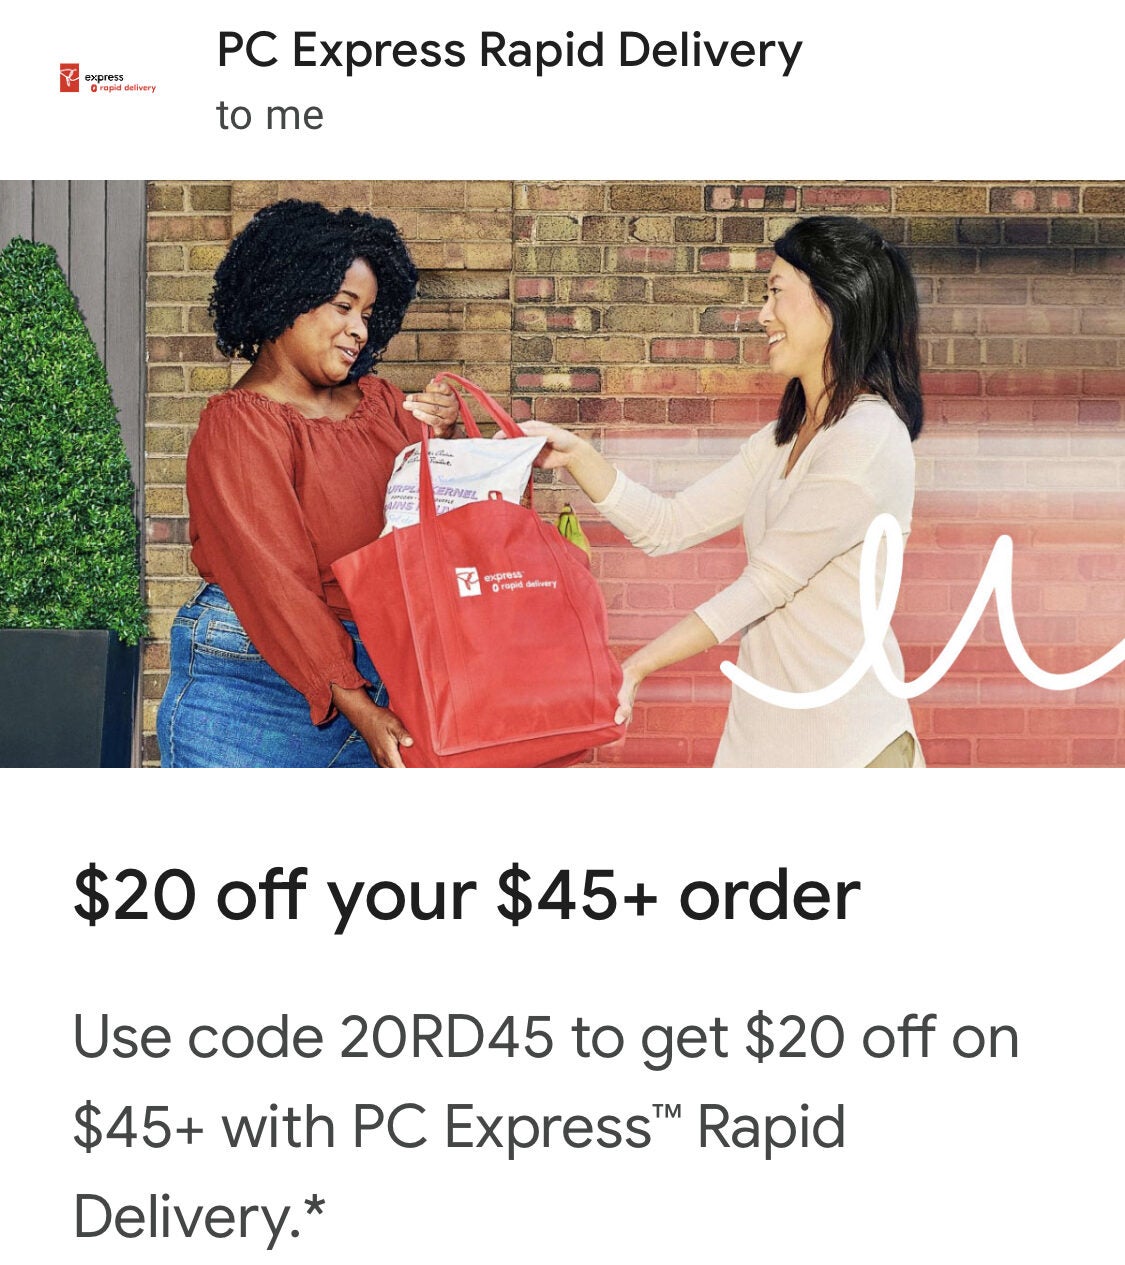 PC Express Delivery Powered by Instacart